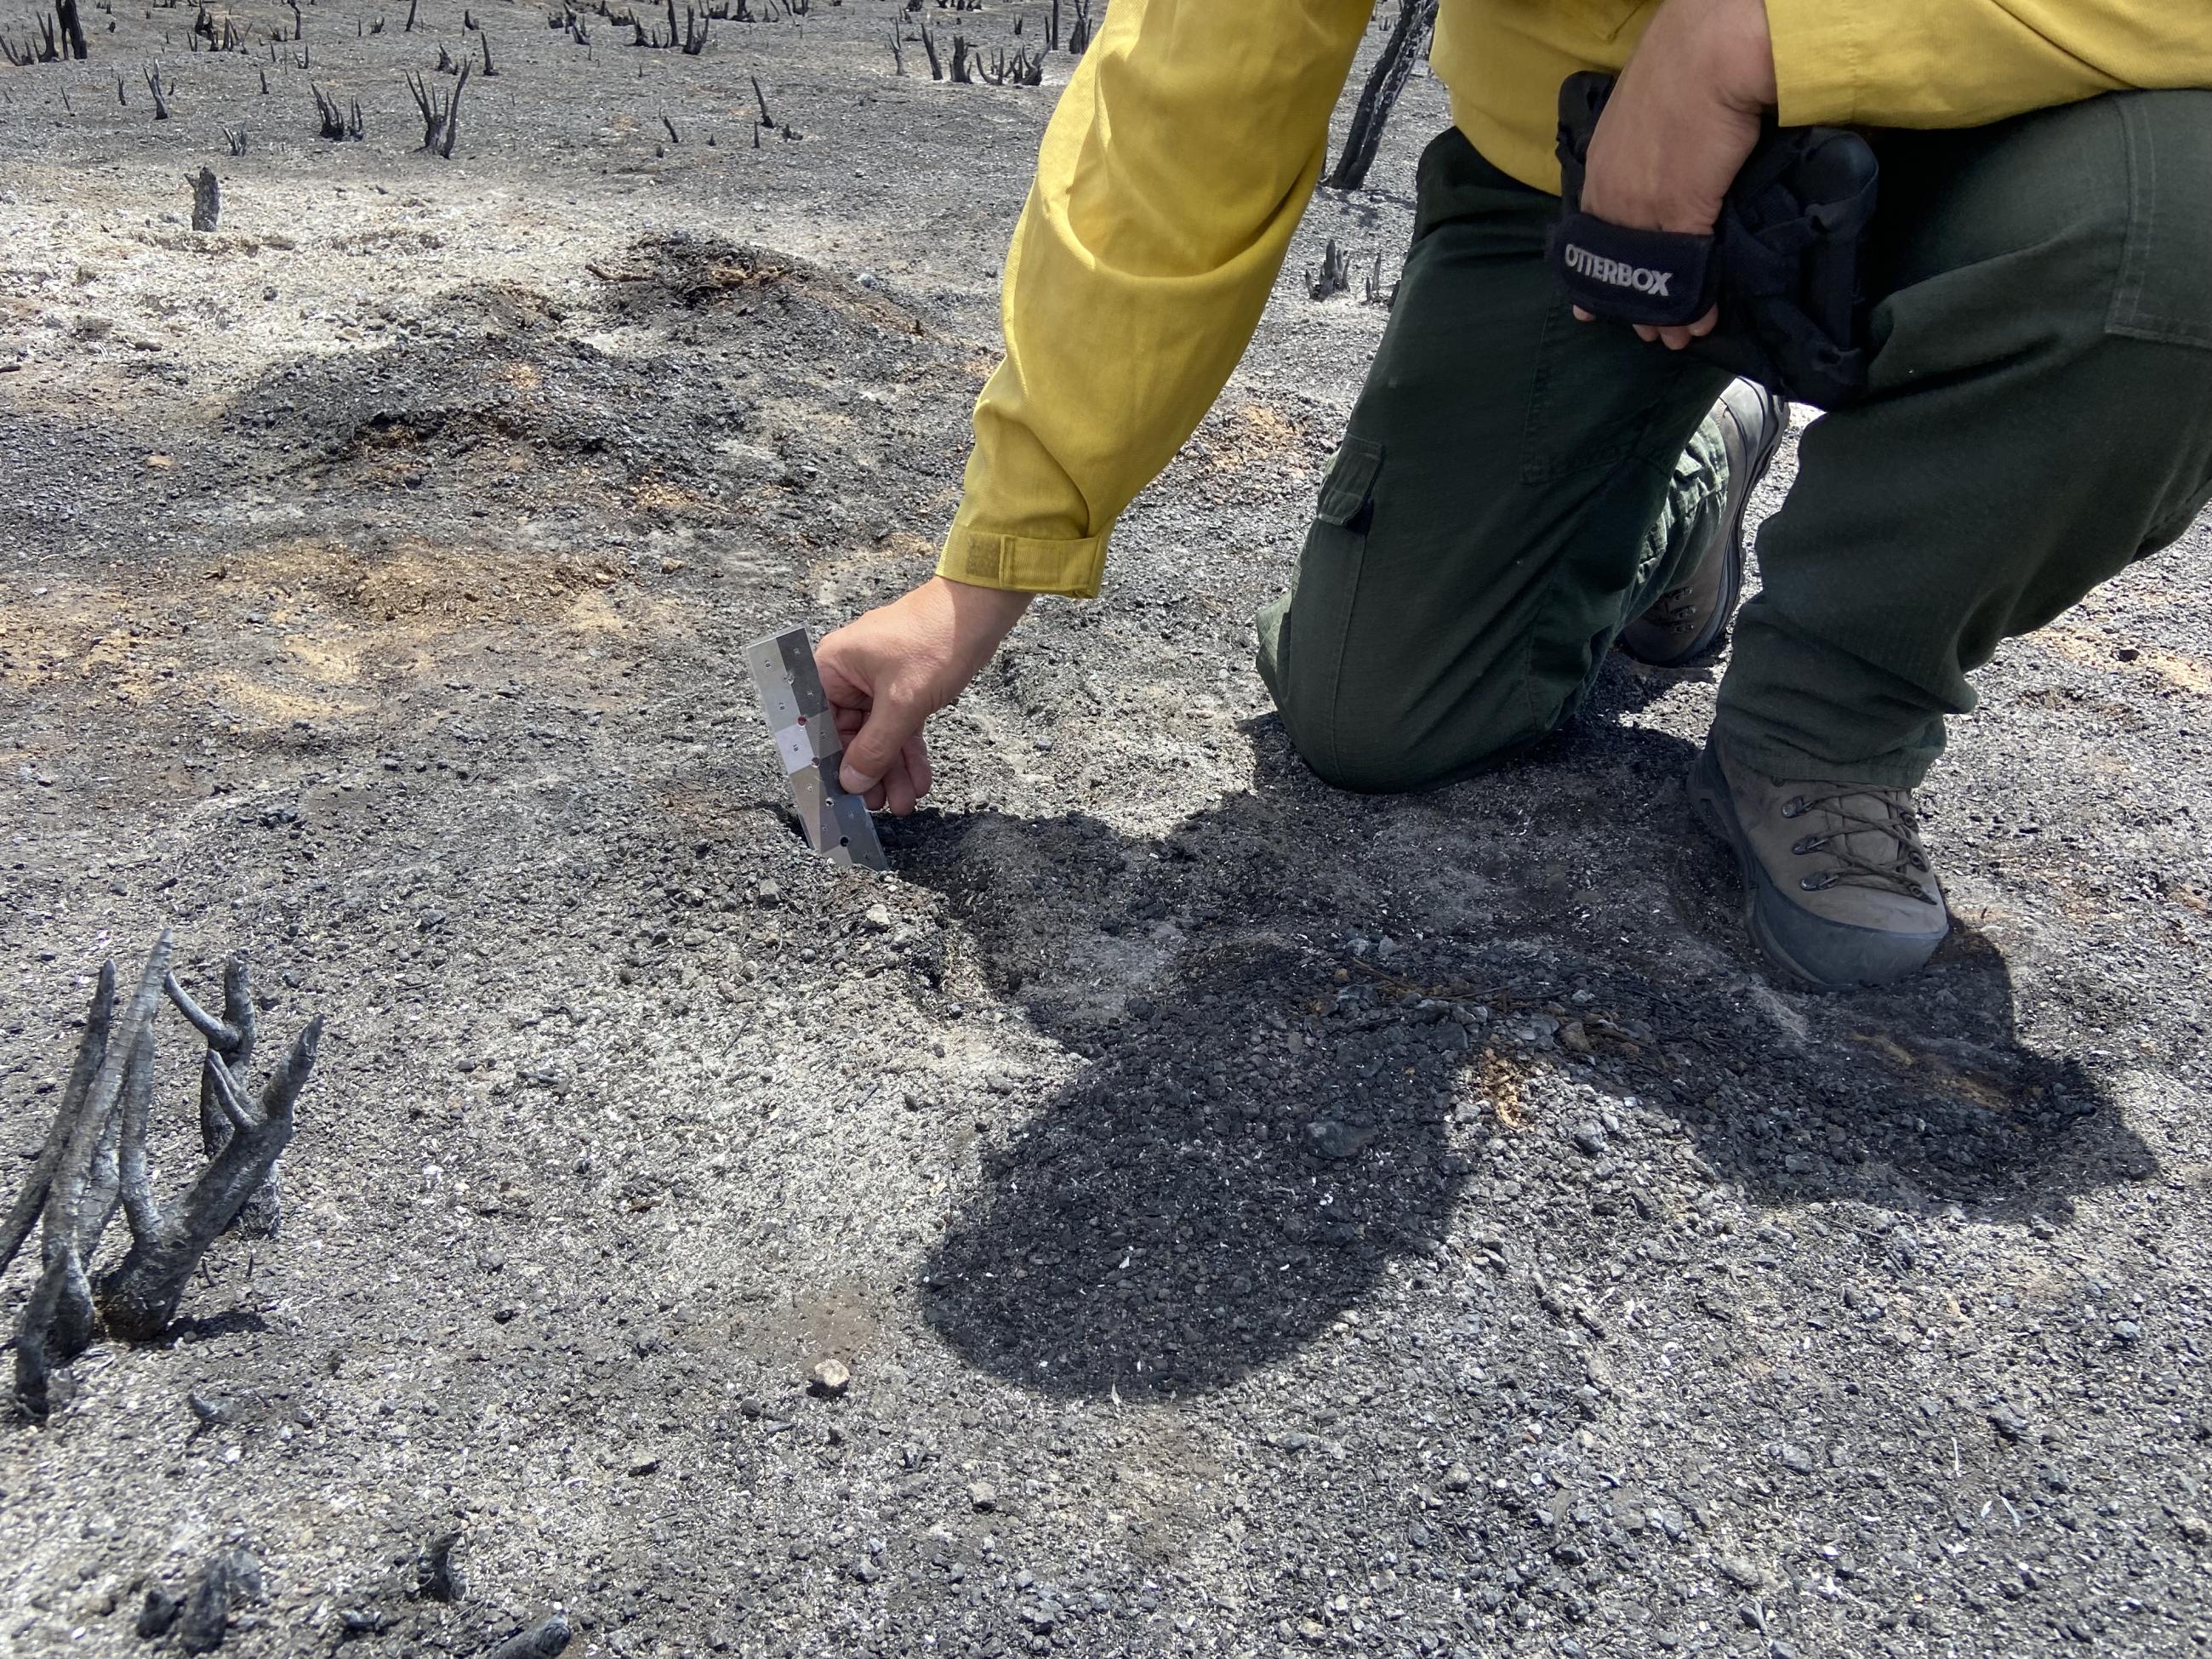 a USFS scientist collects data from burnt soil